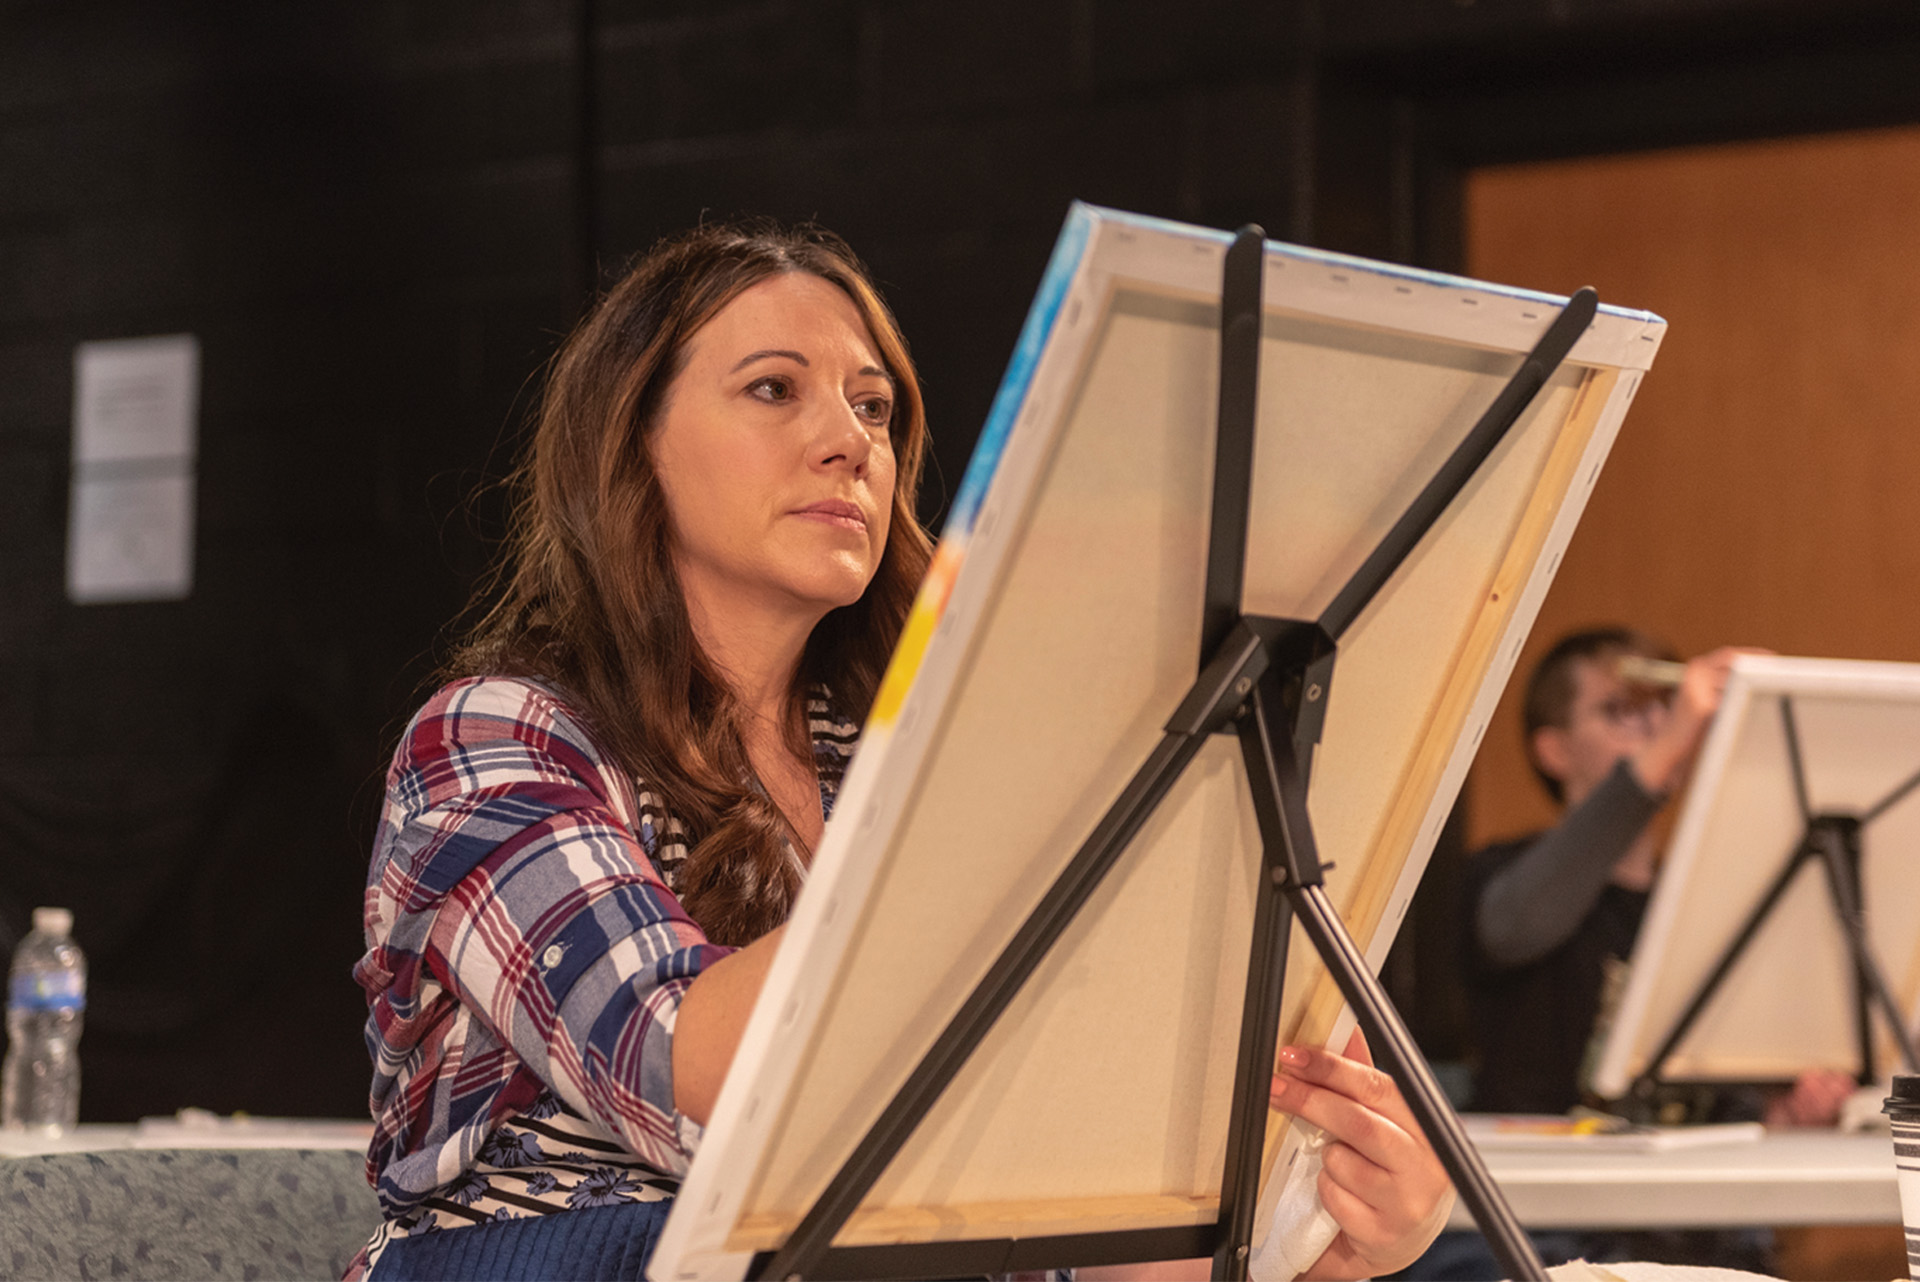 A woman painting at the Bob Ross Workshop